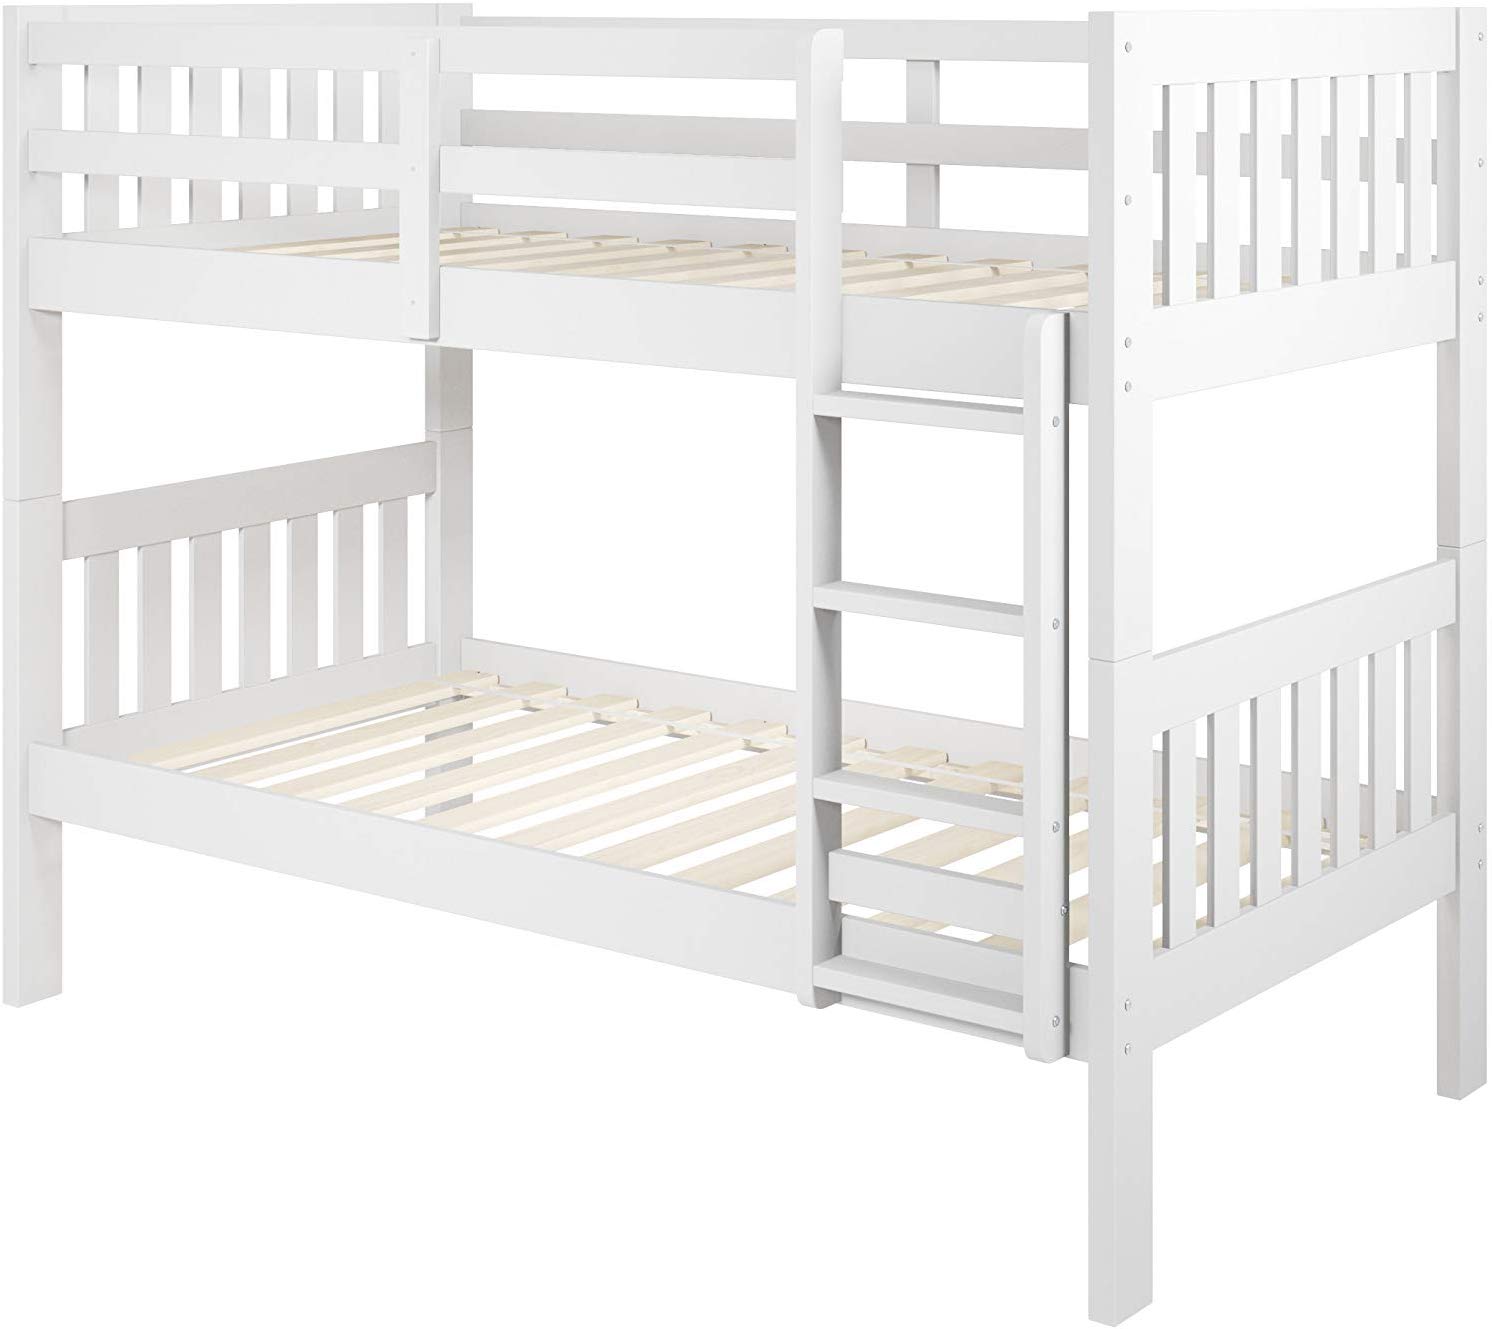 Twin/Twin Size Bunk Bed White